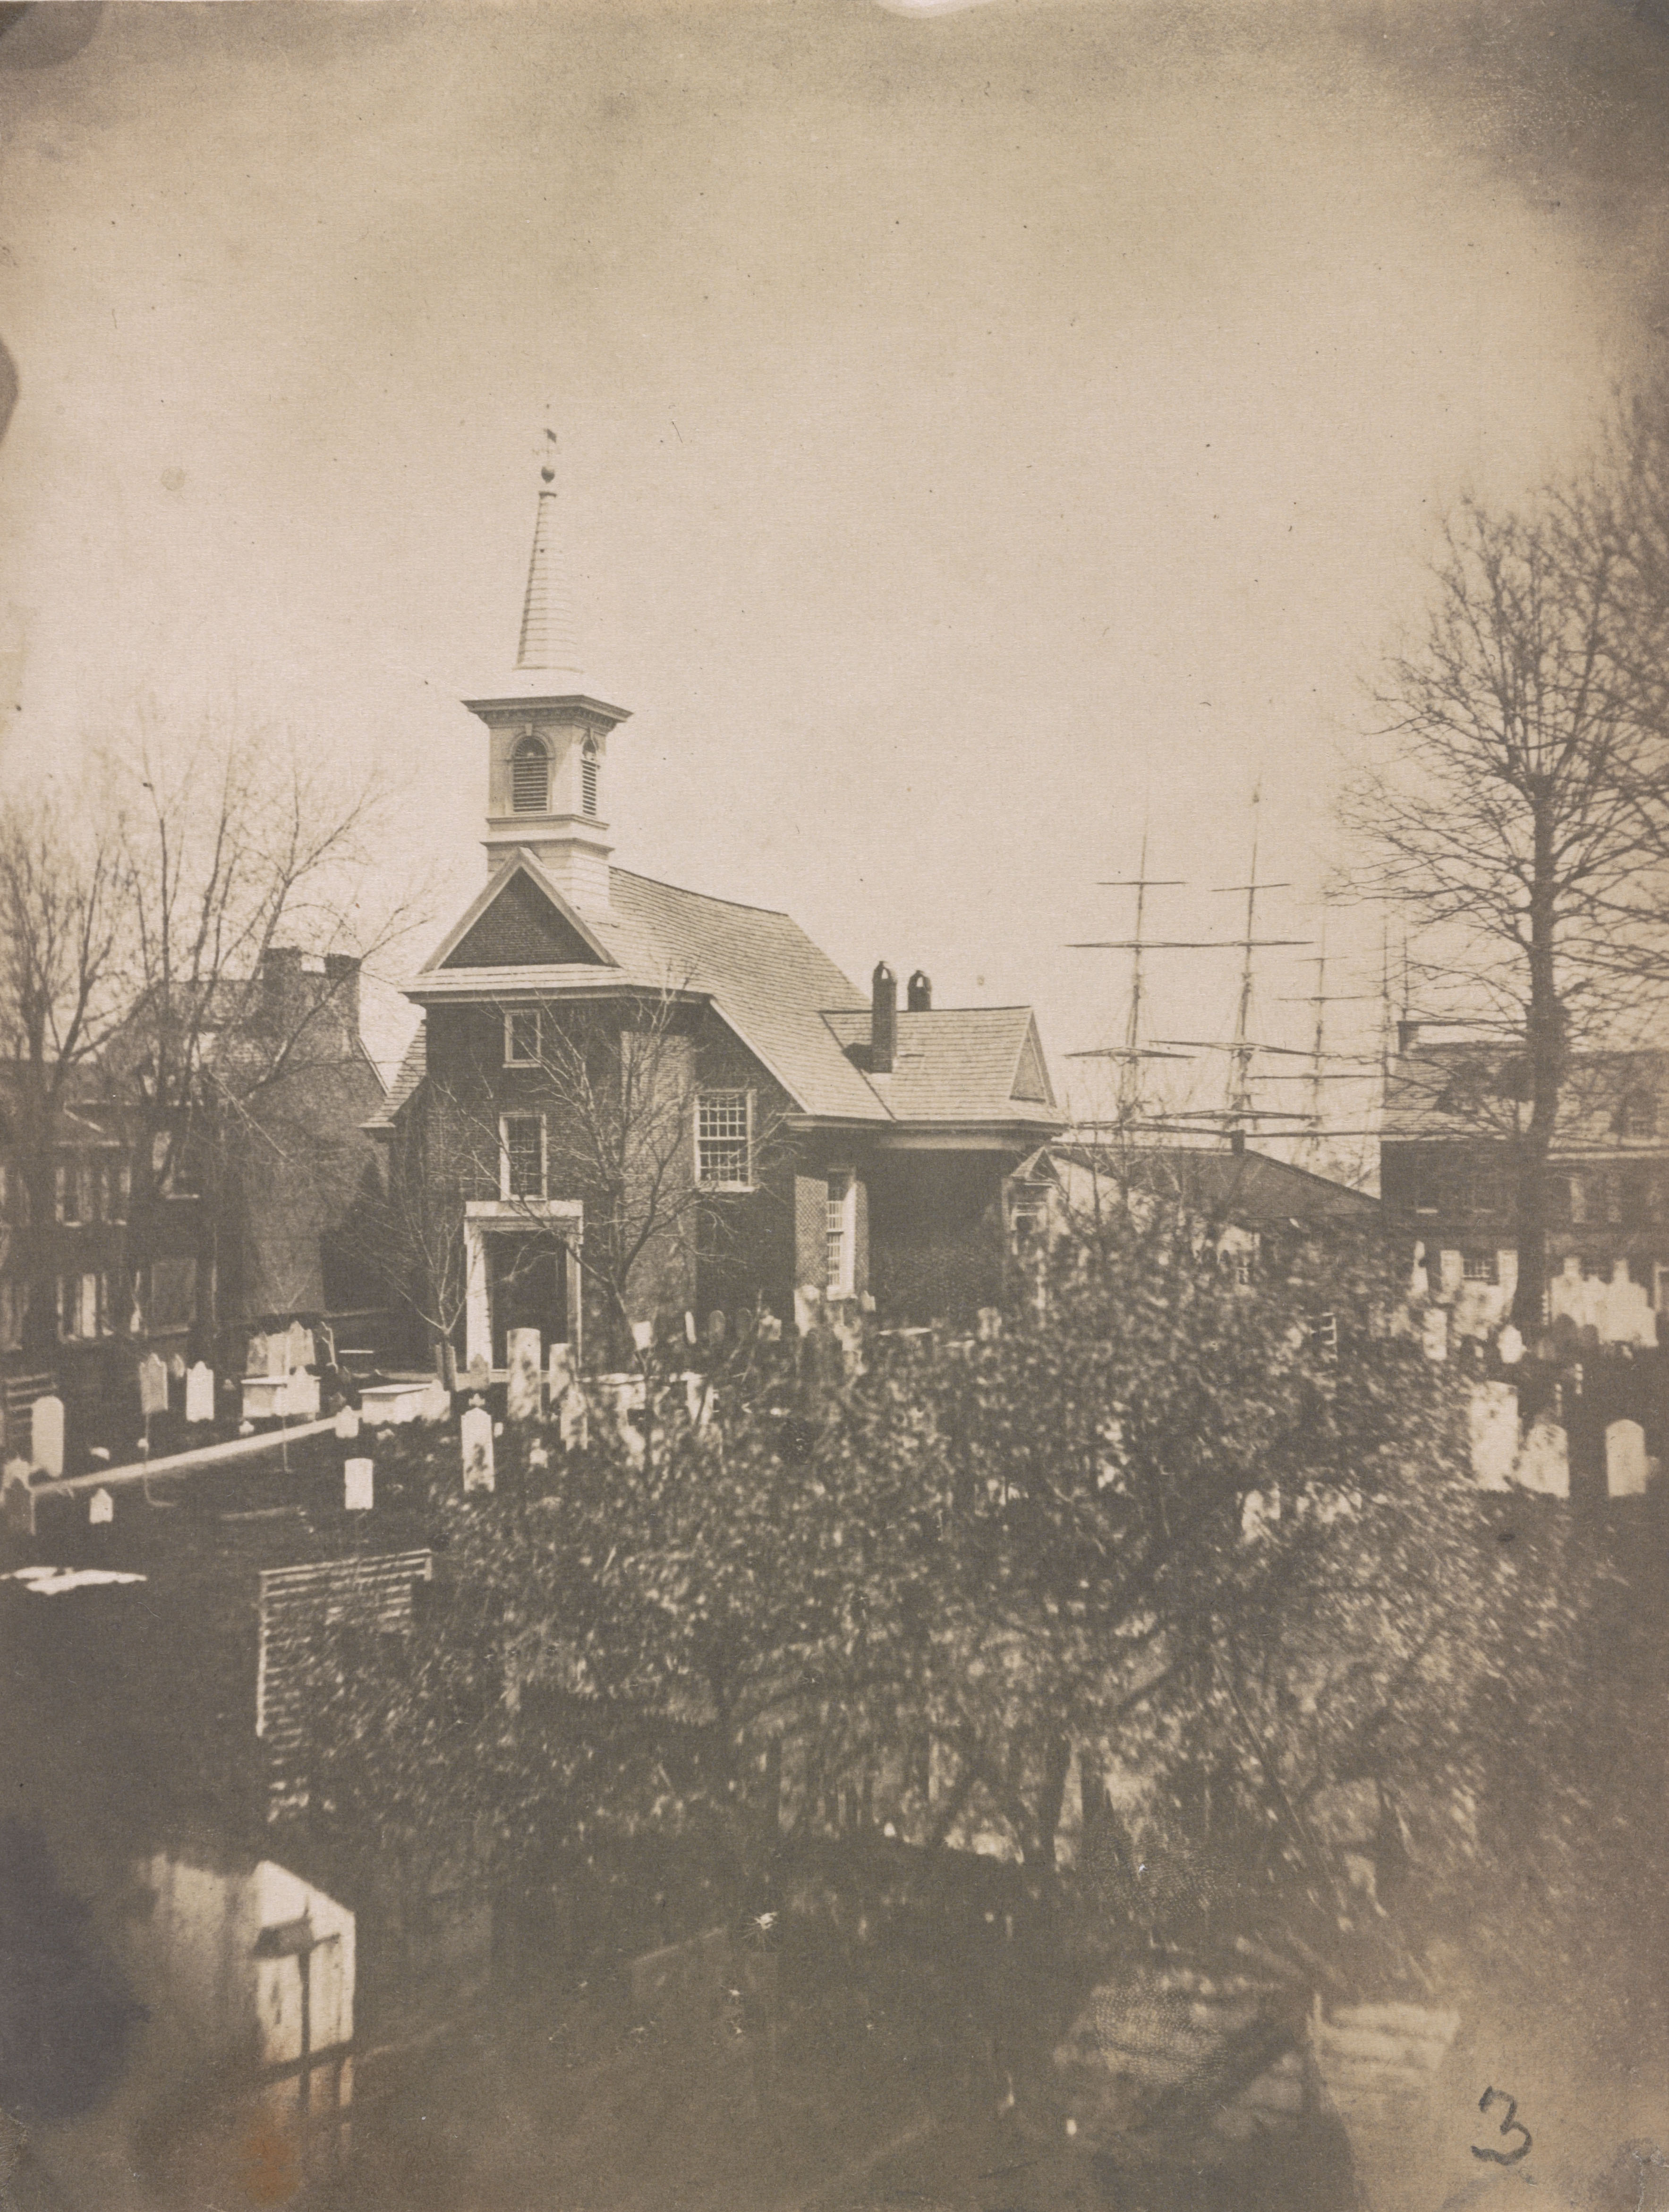 A 19th century photograph of the Gloria Dei Church, with the cemetery in the foreground.